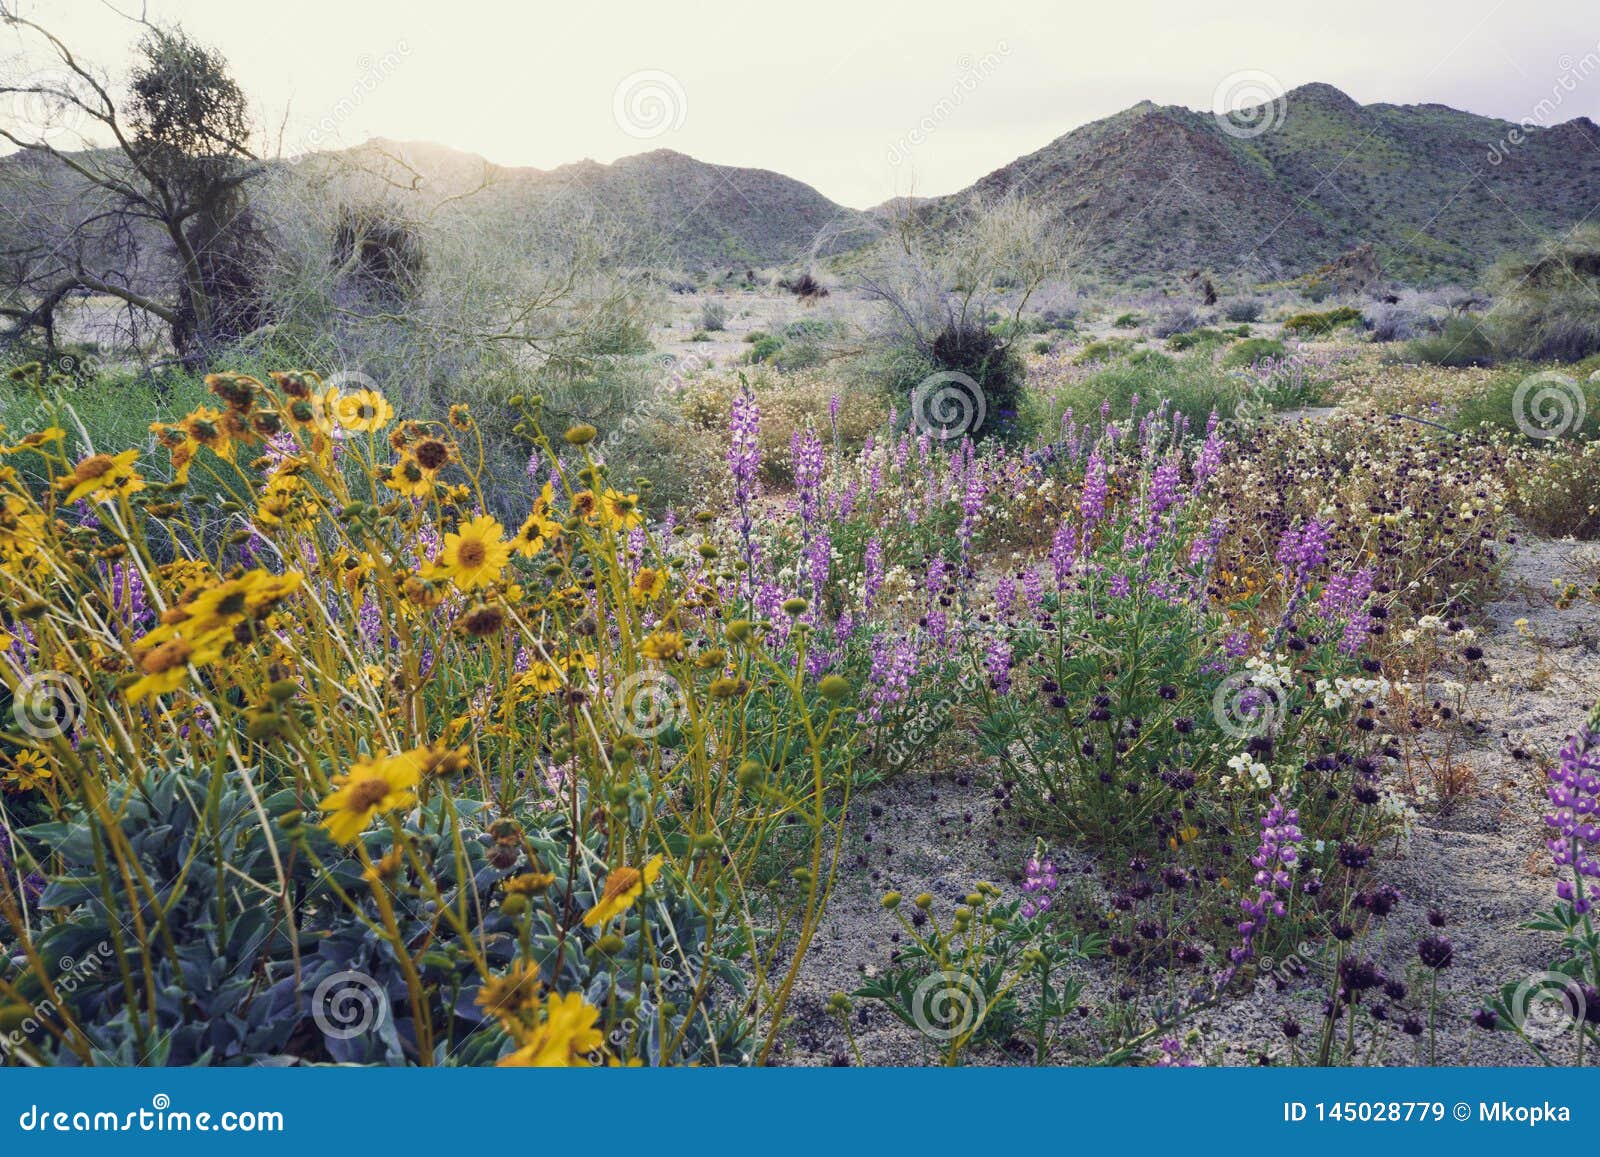 Beautiful Mixed Wildflowers In The Desert In Joshua Tree National Park During A Super Bloom Spring Season Stock Image Image Of Superbloom Space 145028779